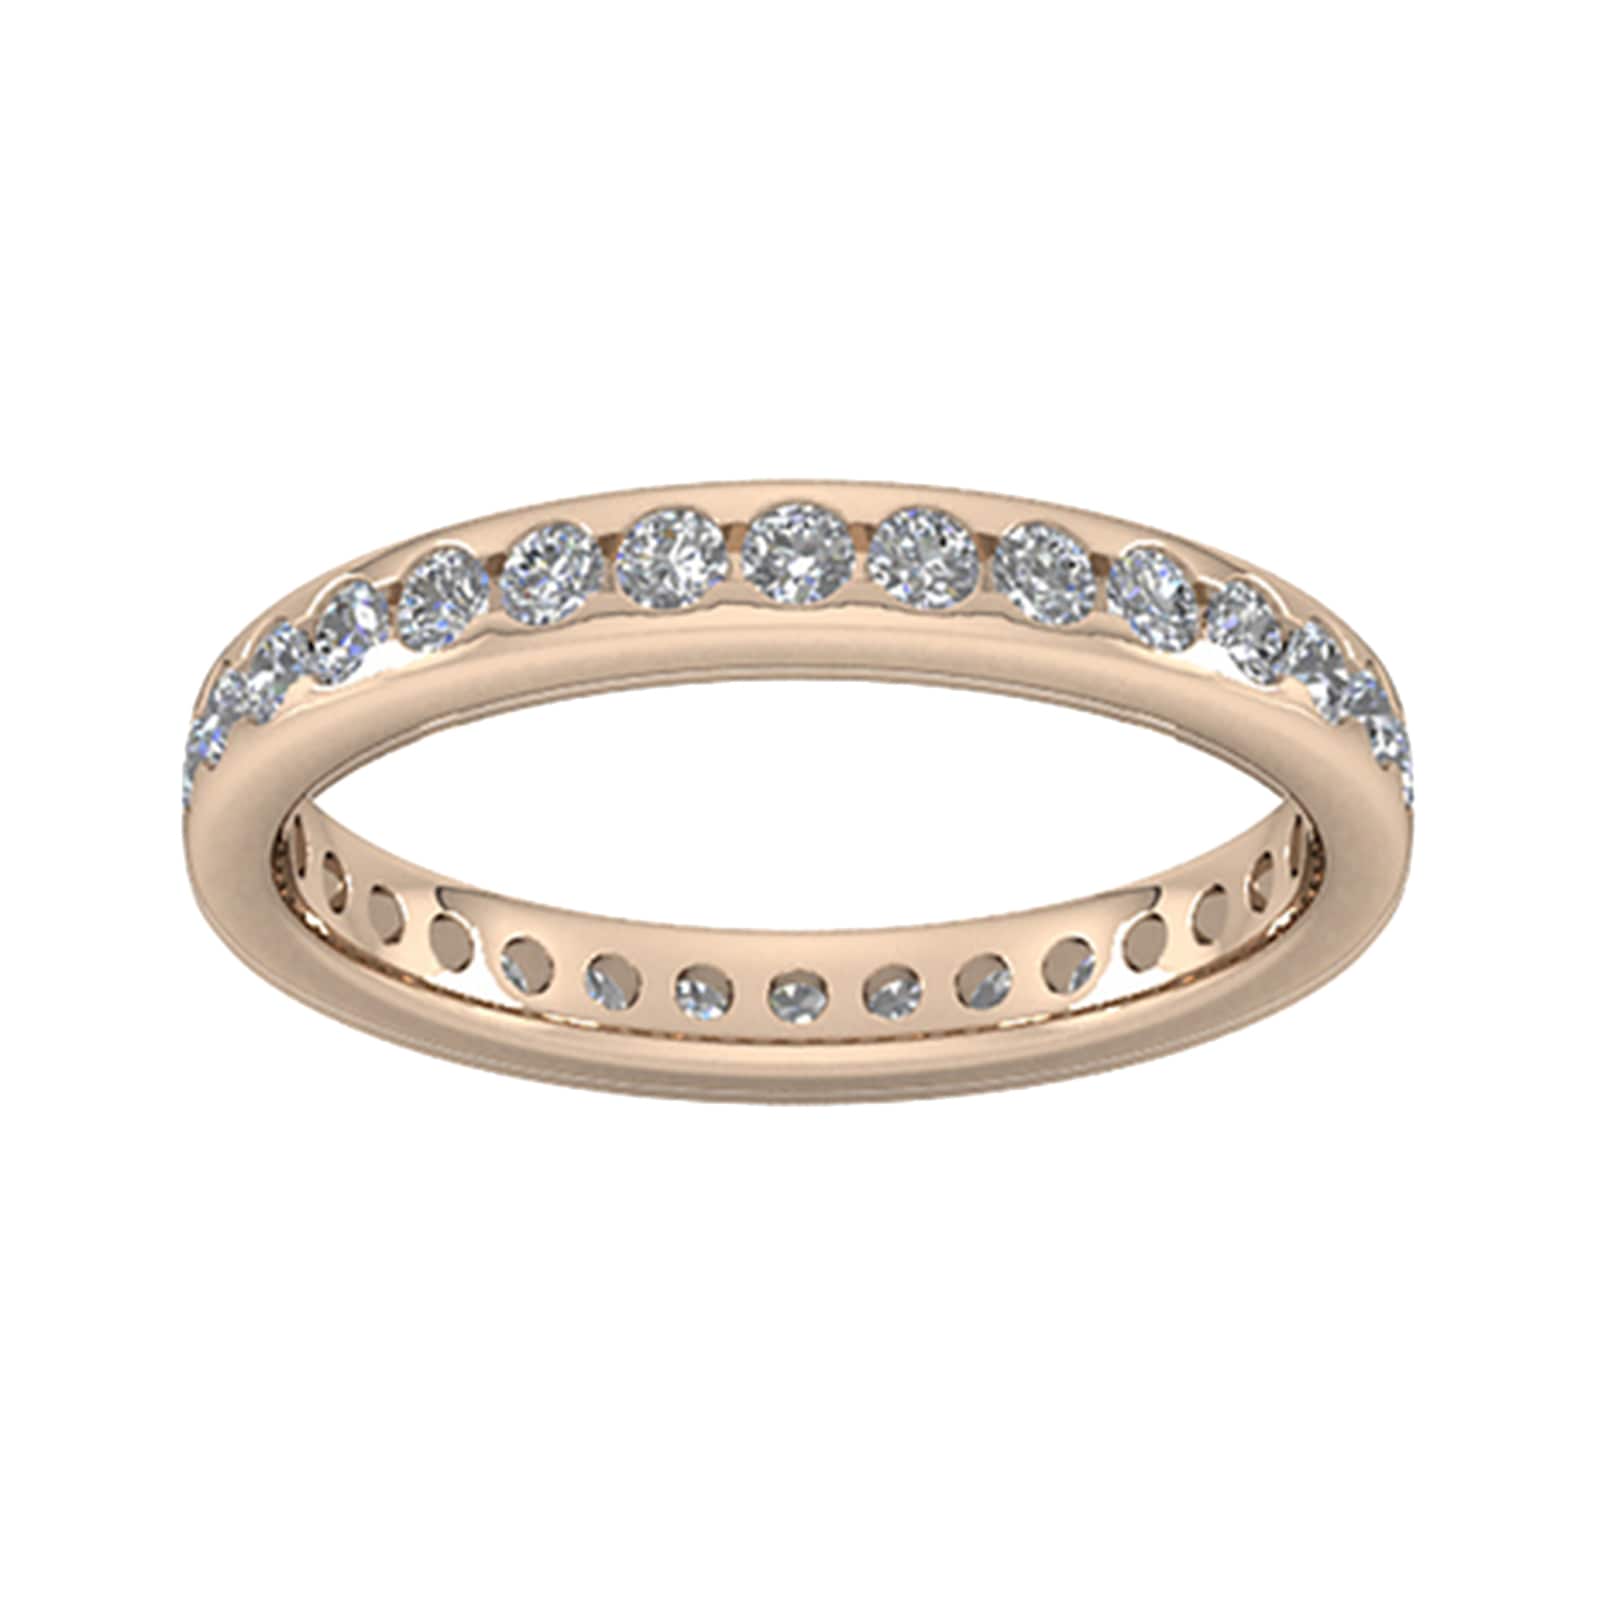 0.81 Carat Total Weight Brilliant Cut Scalloped Channel Set Diamond Wedding Ring In 9 Carat Rose Gold - Ring Size S